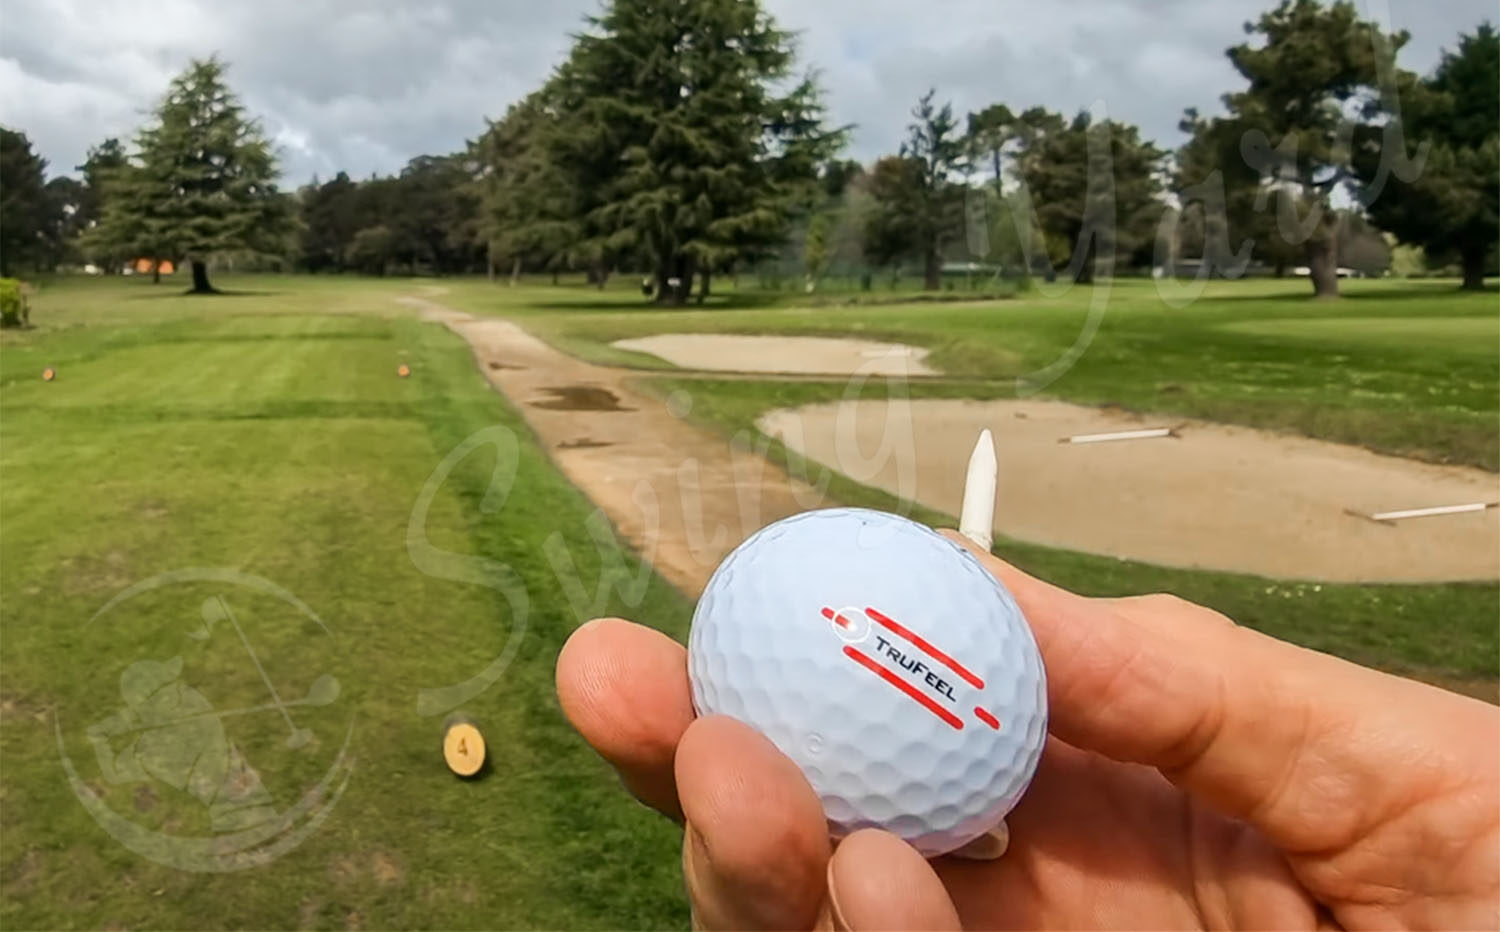 A Titleist TruFeel ball in my hand at the golf course